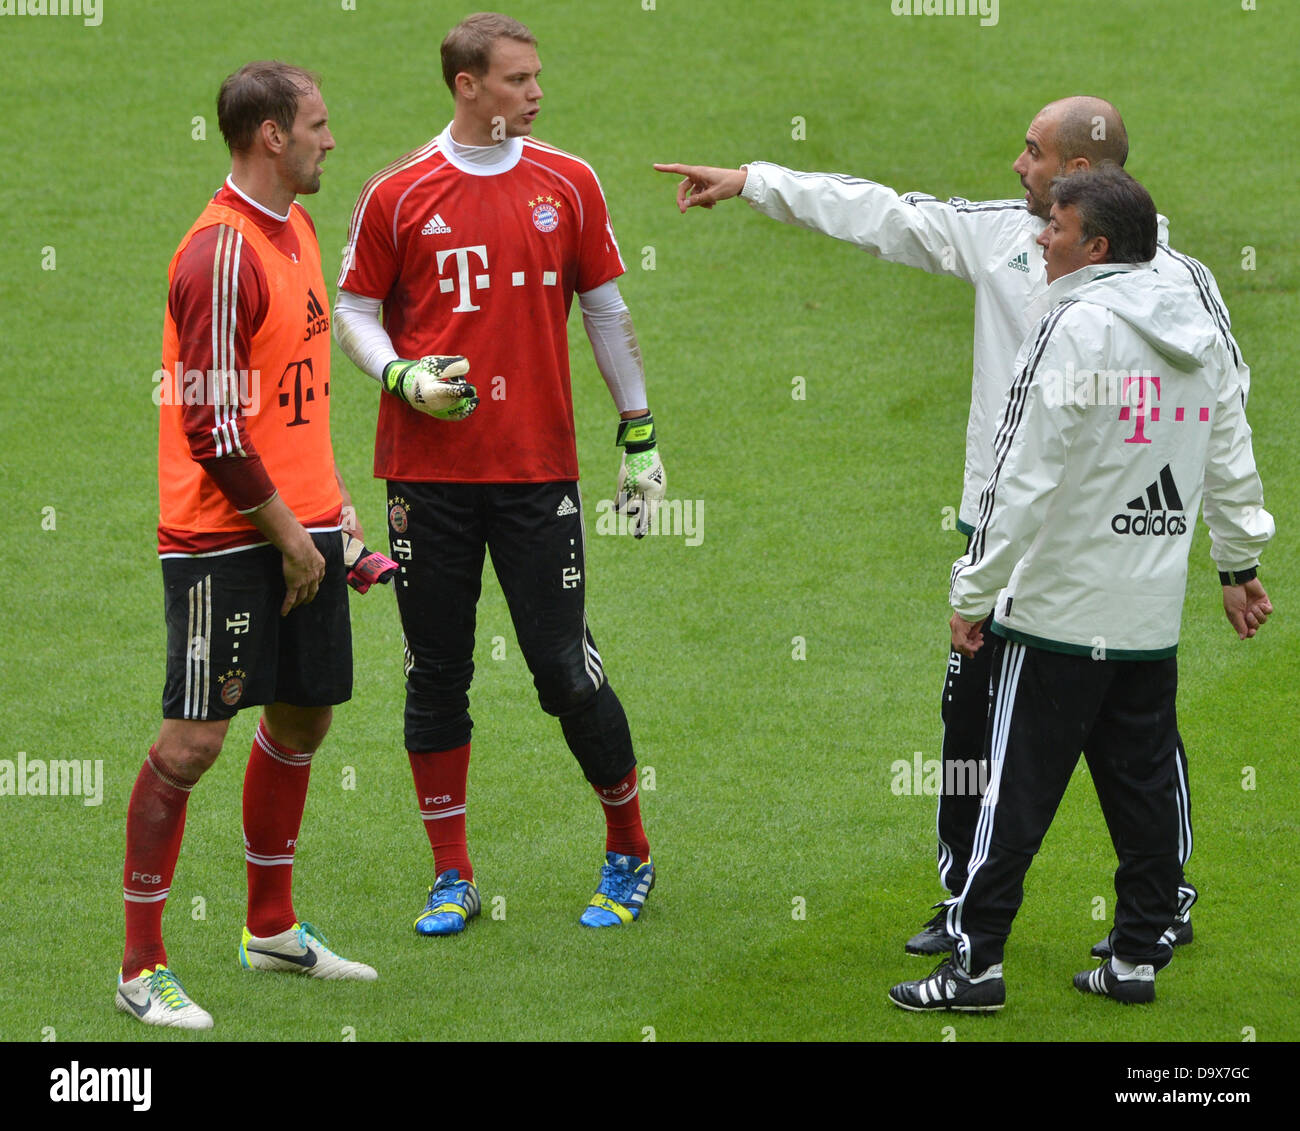 Bayern Munich's goalkeepers Tom Starke (L-R), Manuel Neuer receive instruction from coach Pep Guardiola and co-coach Domenec Torrent during the practice session of Bundesliga soccer club FC Bayern Munich in Munich, Germany, 27 June 2013. Photo:  Peter Kneffel Stock Photo